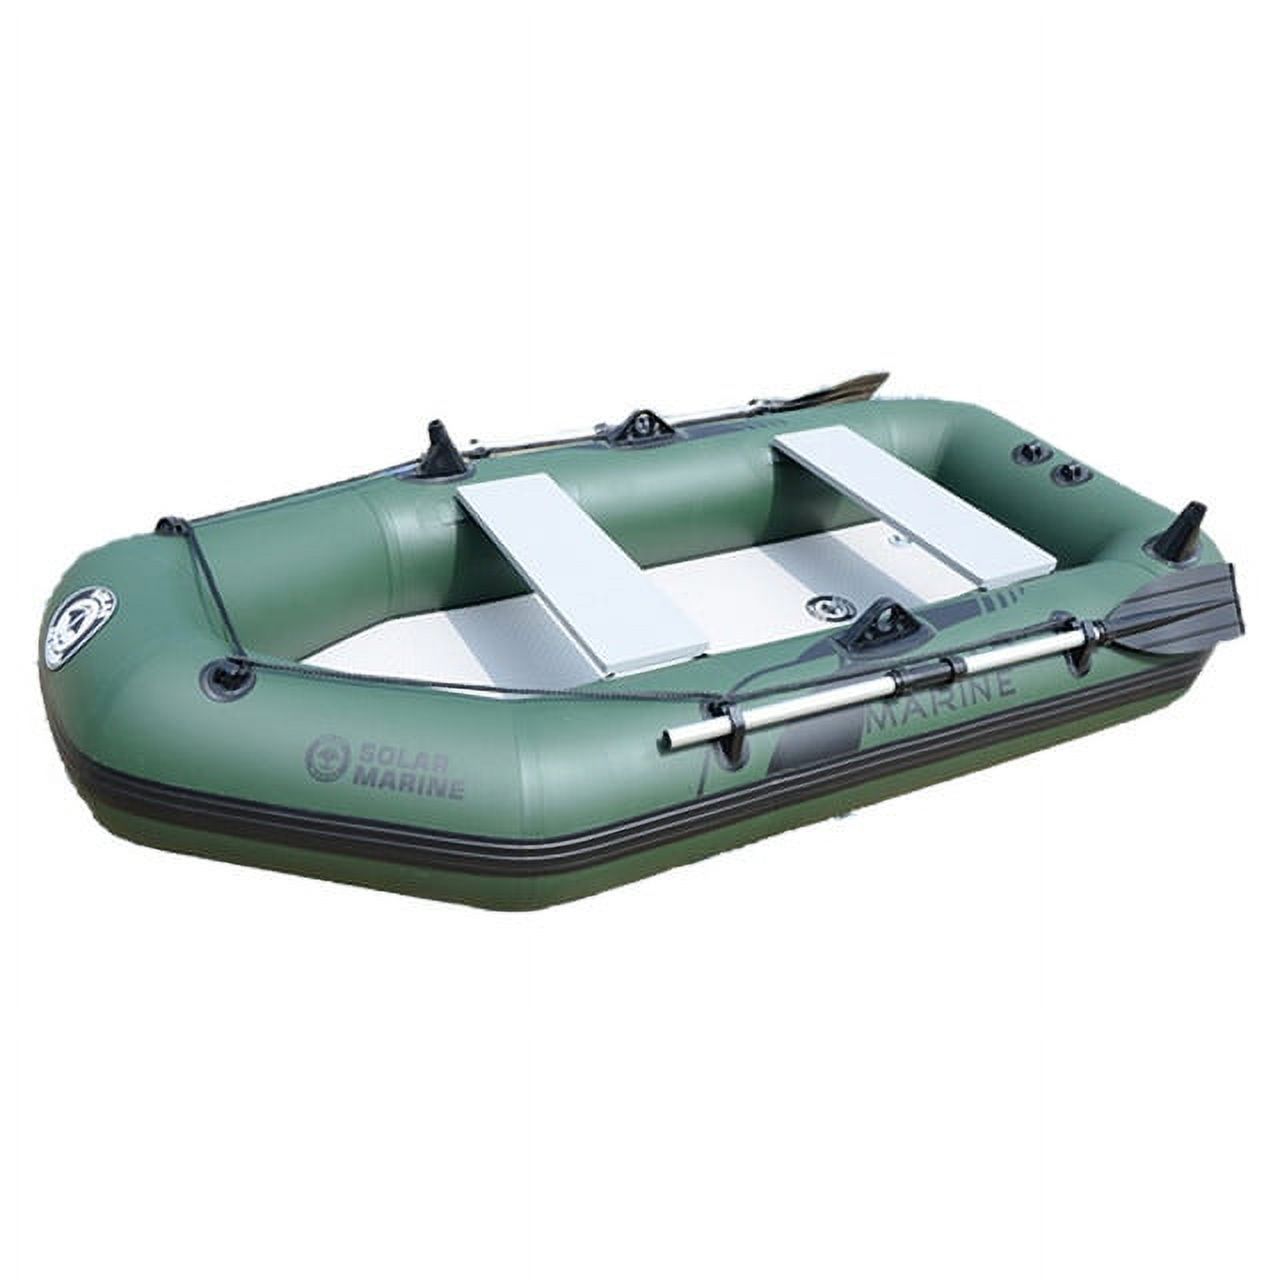 2.6 M 3 Person PVC Portable Inflatable Boat Fishing Kayak Canoe Dinghy Set with Accessories Water Sports - image 1 of 6